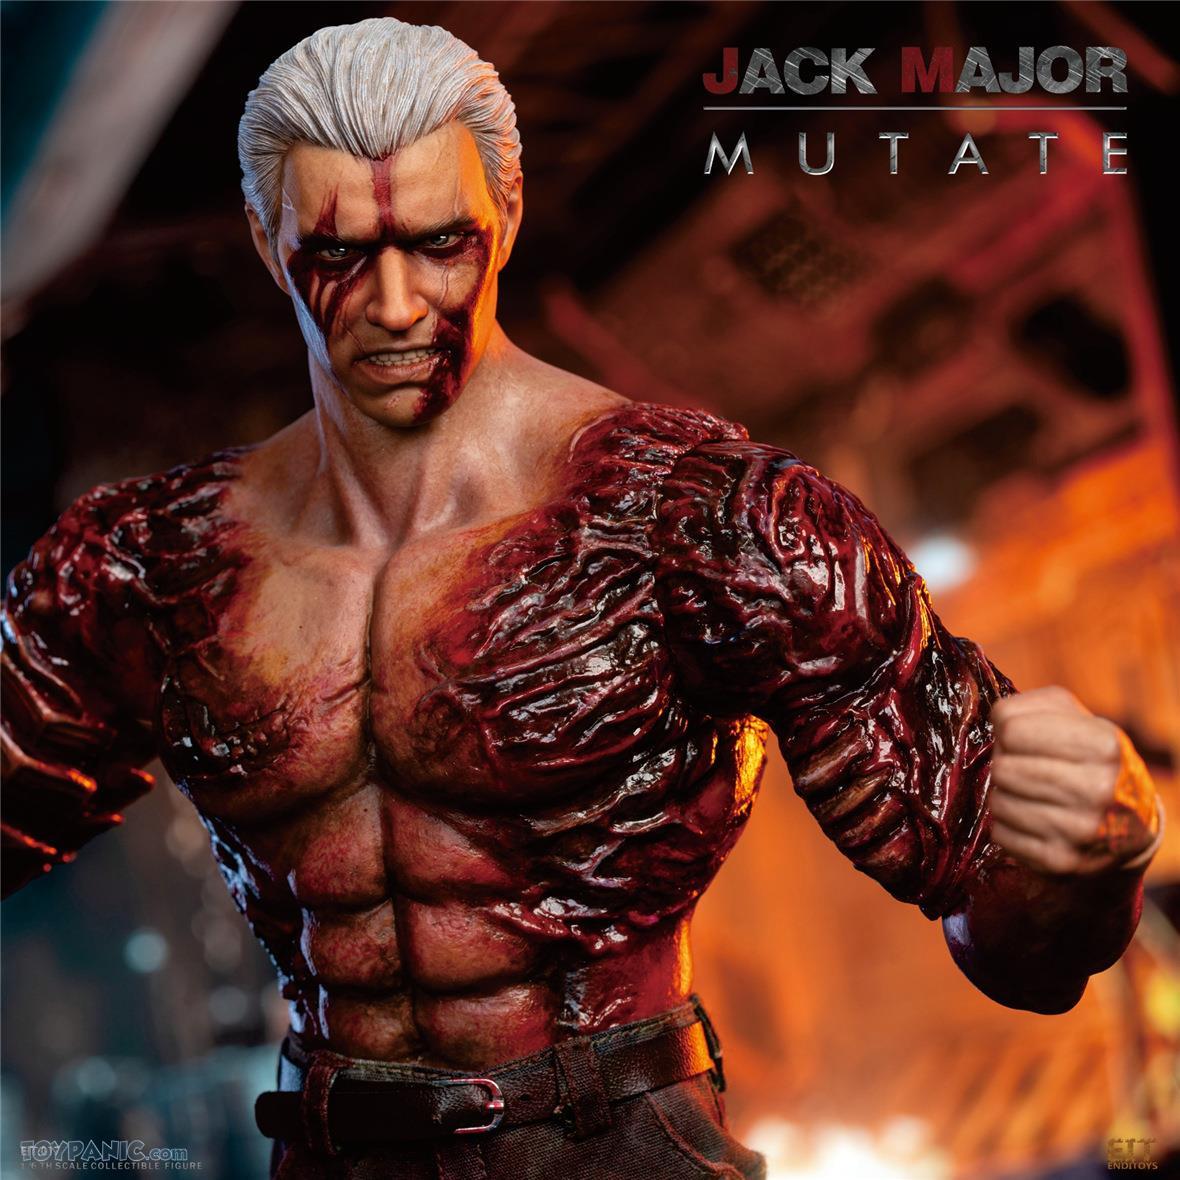 mutate - NEW PRODUCT:  1/6 Jack Major Mutate from End I Toys  2732024105954AM_720776